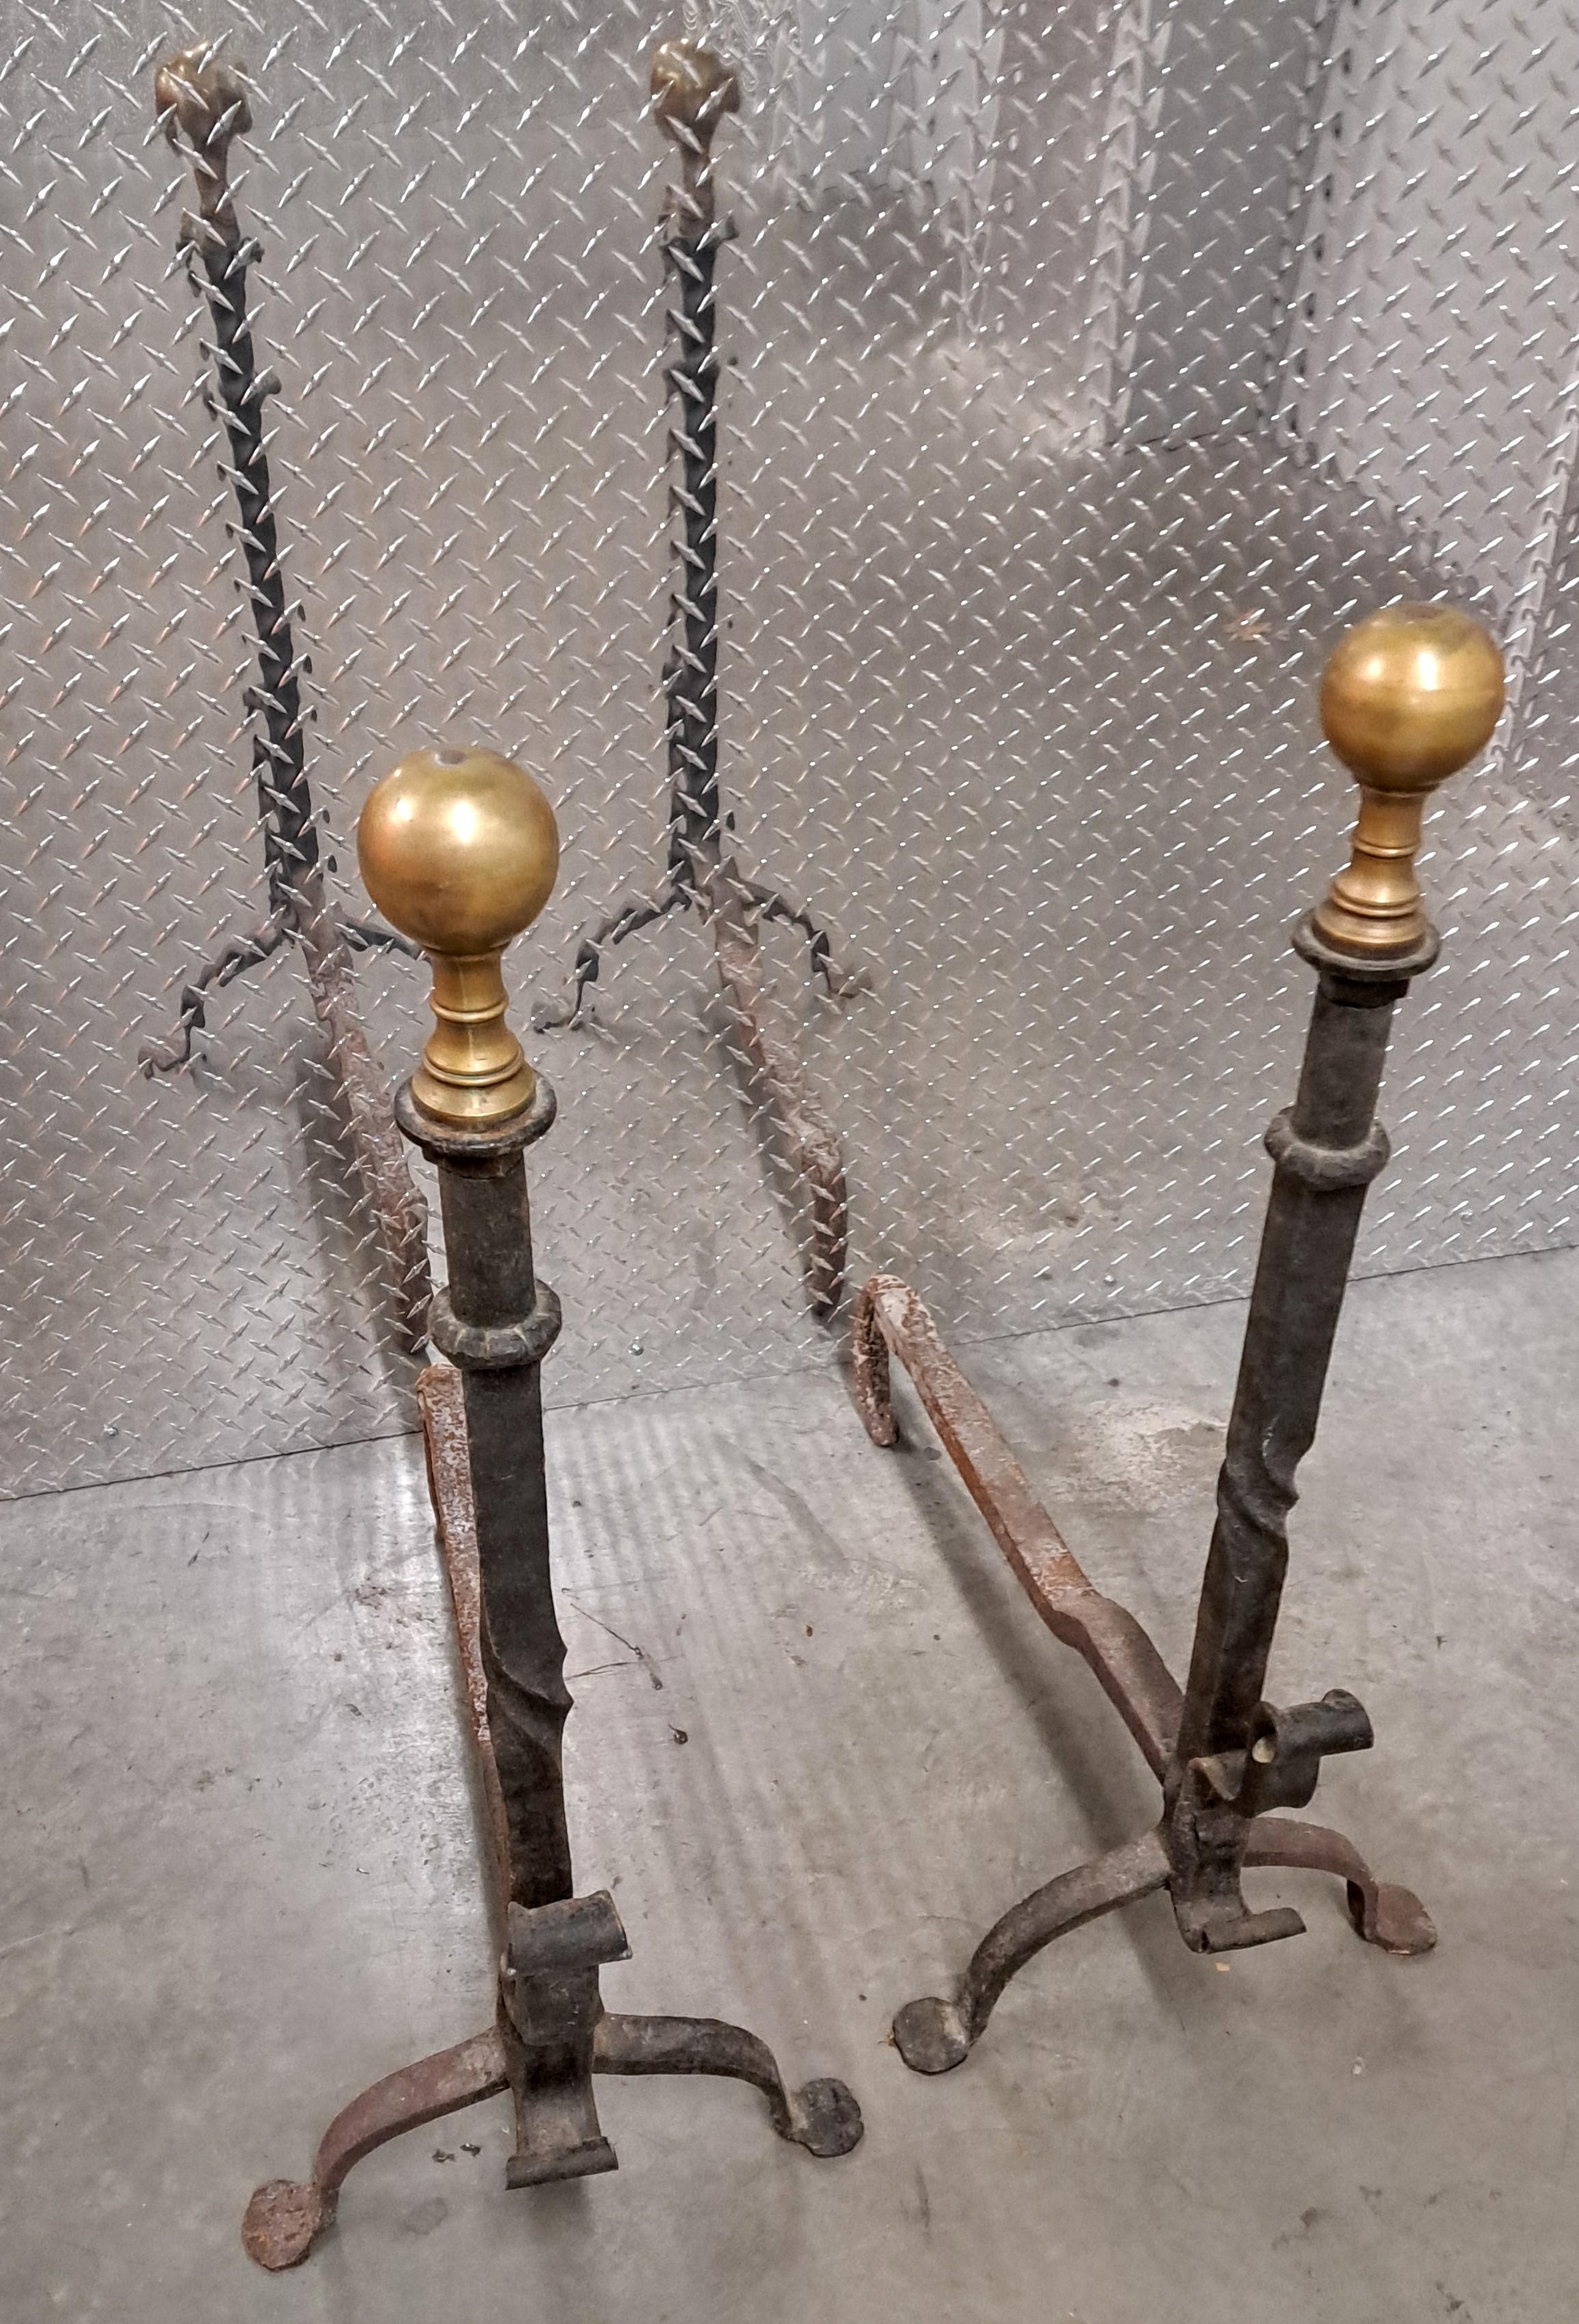 Pair of large majestic brass and wrought-iron andirons. Classic antique heavy fireplace accessory with brass accents. Finely crafted andirons will continue to age gracefully.